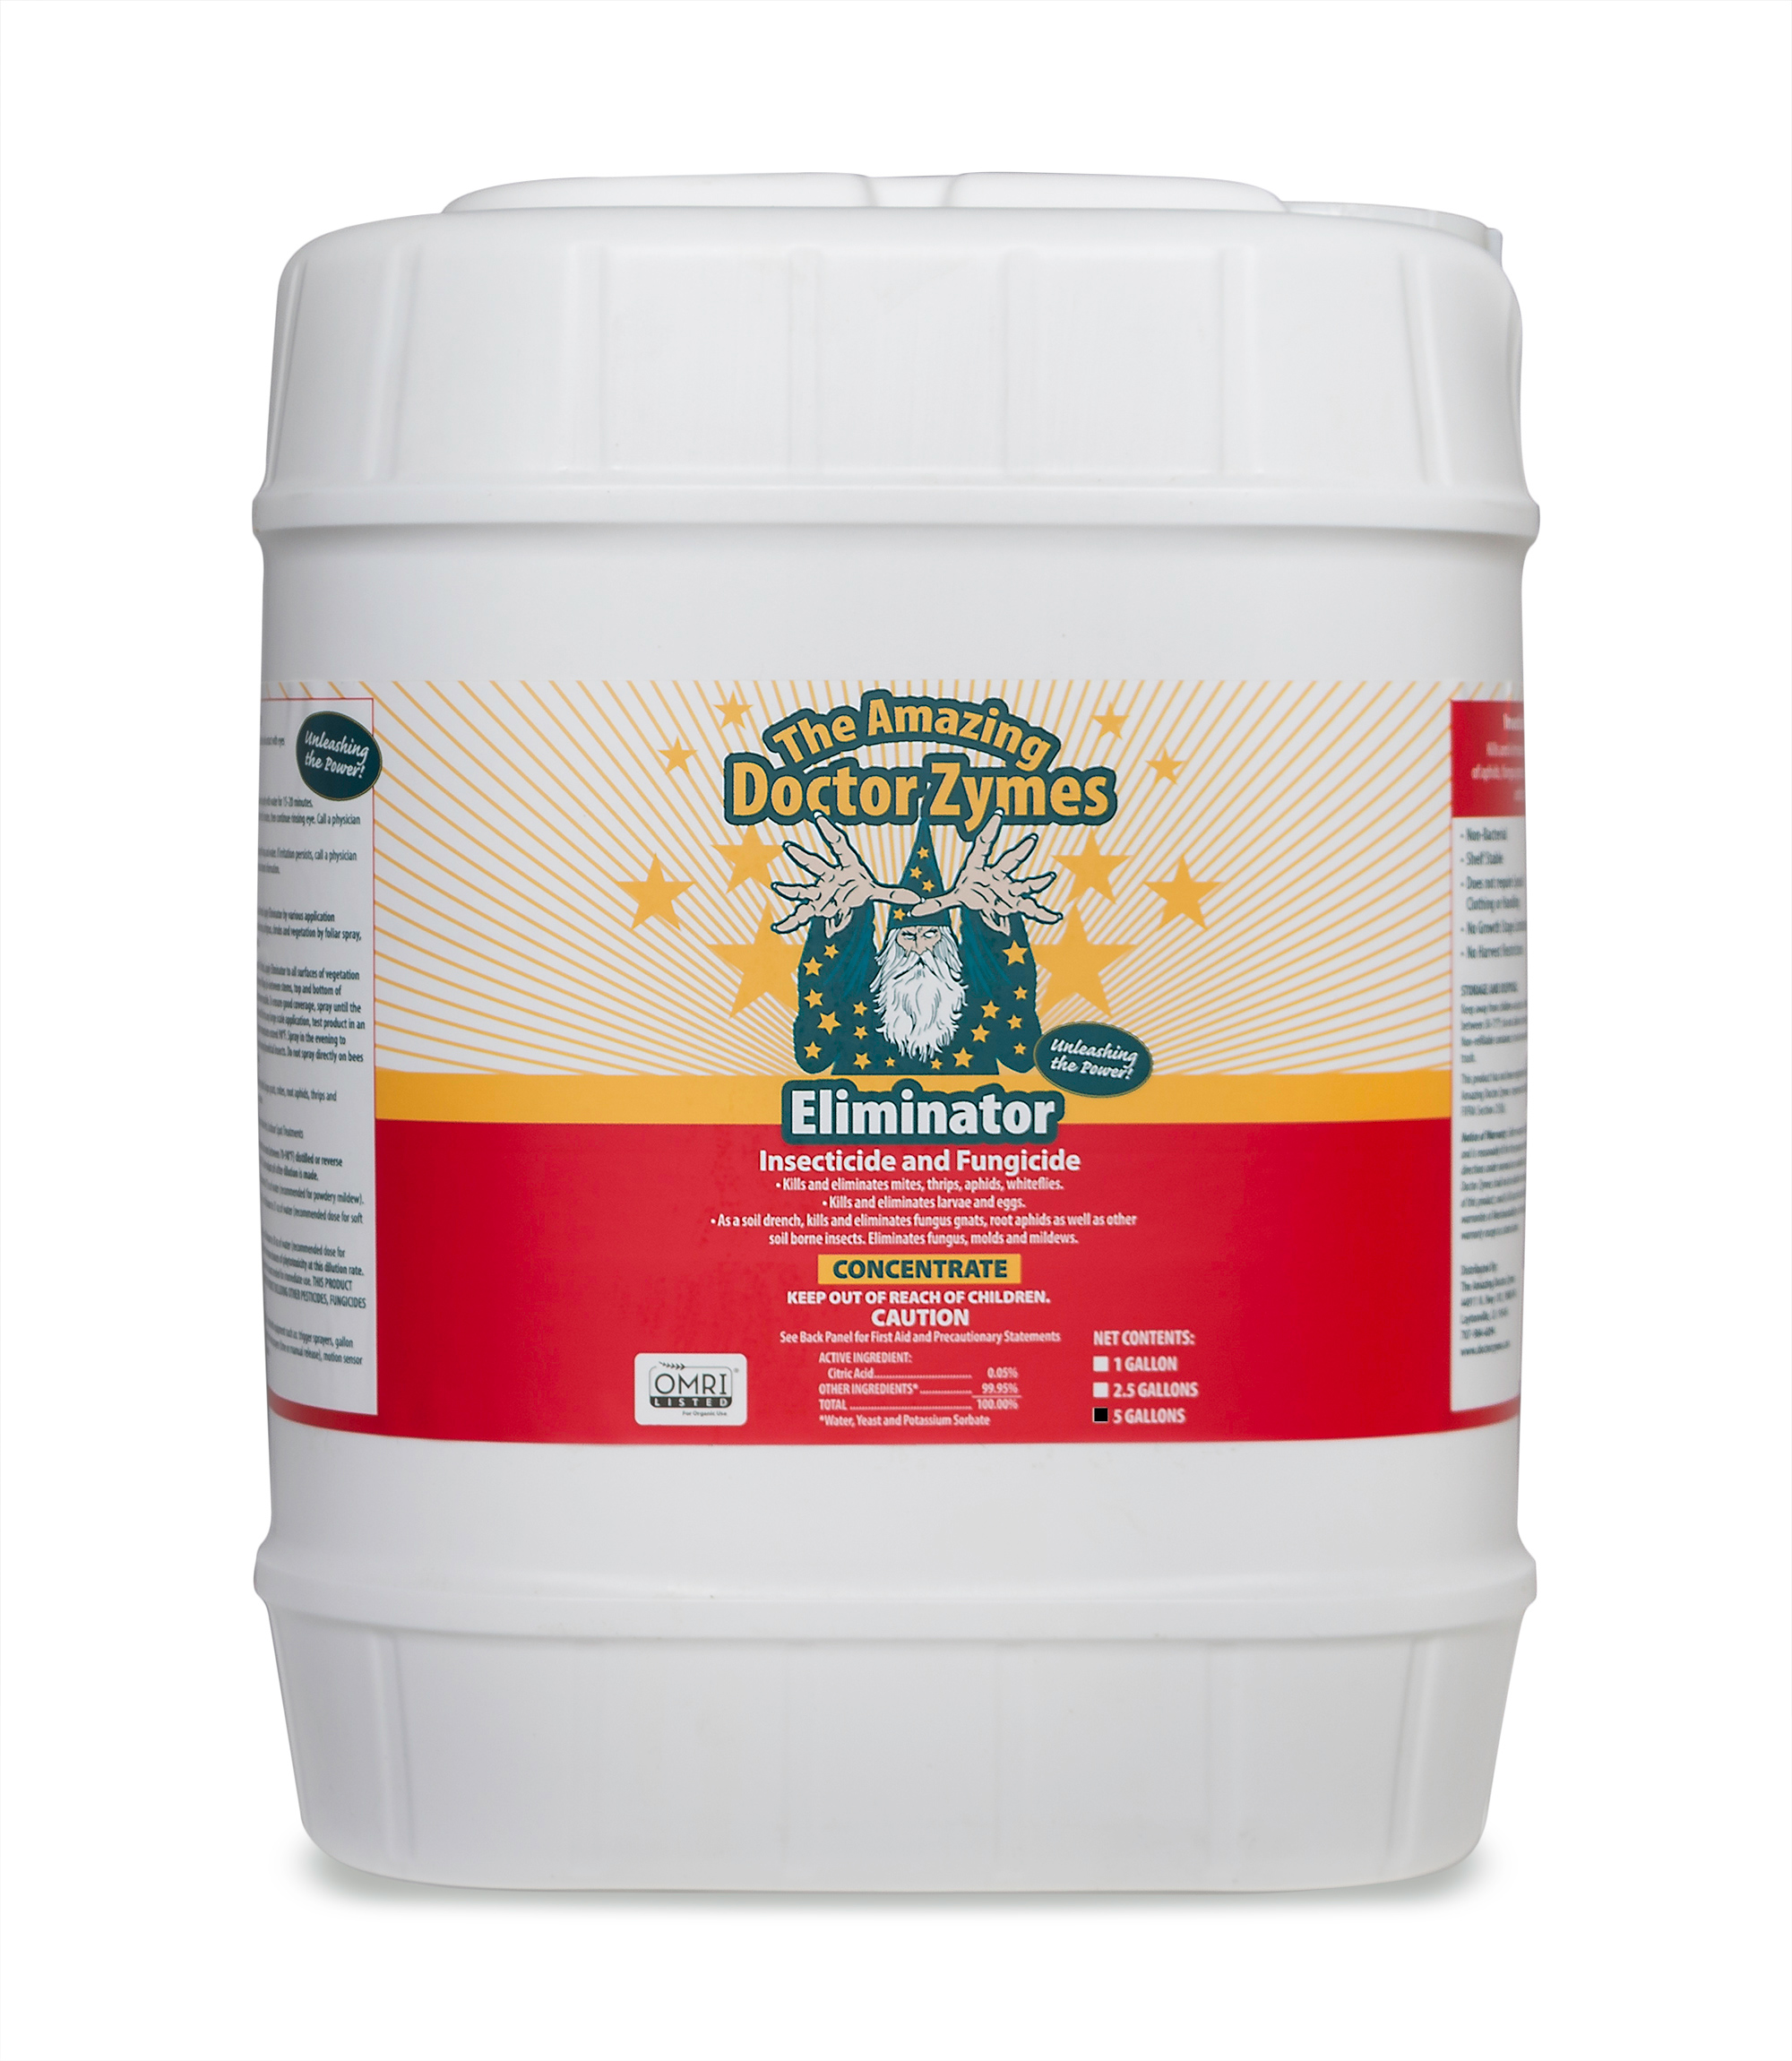 Picture for The Amazing Doctor Zymes Eliminator Concentrate, 5 gal